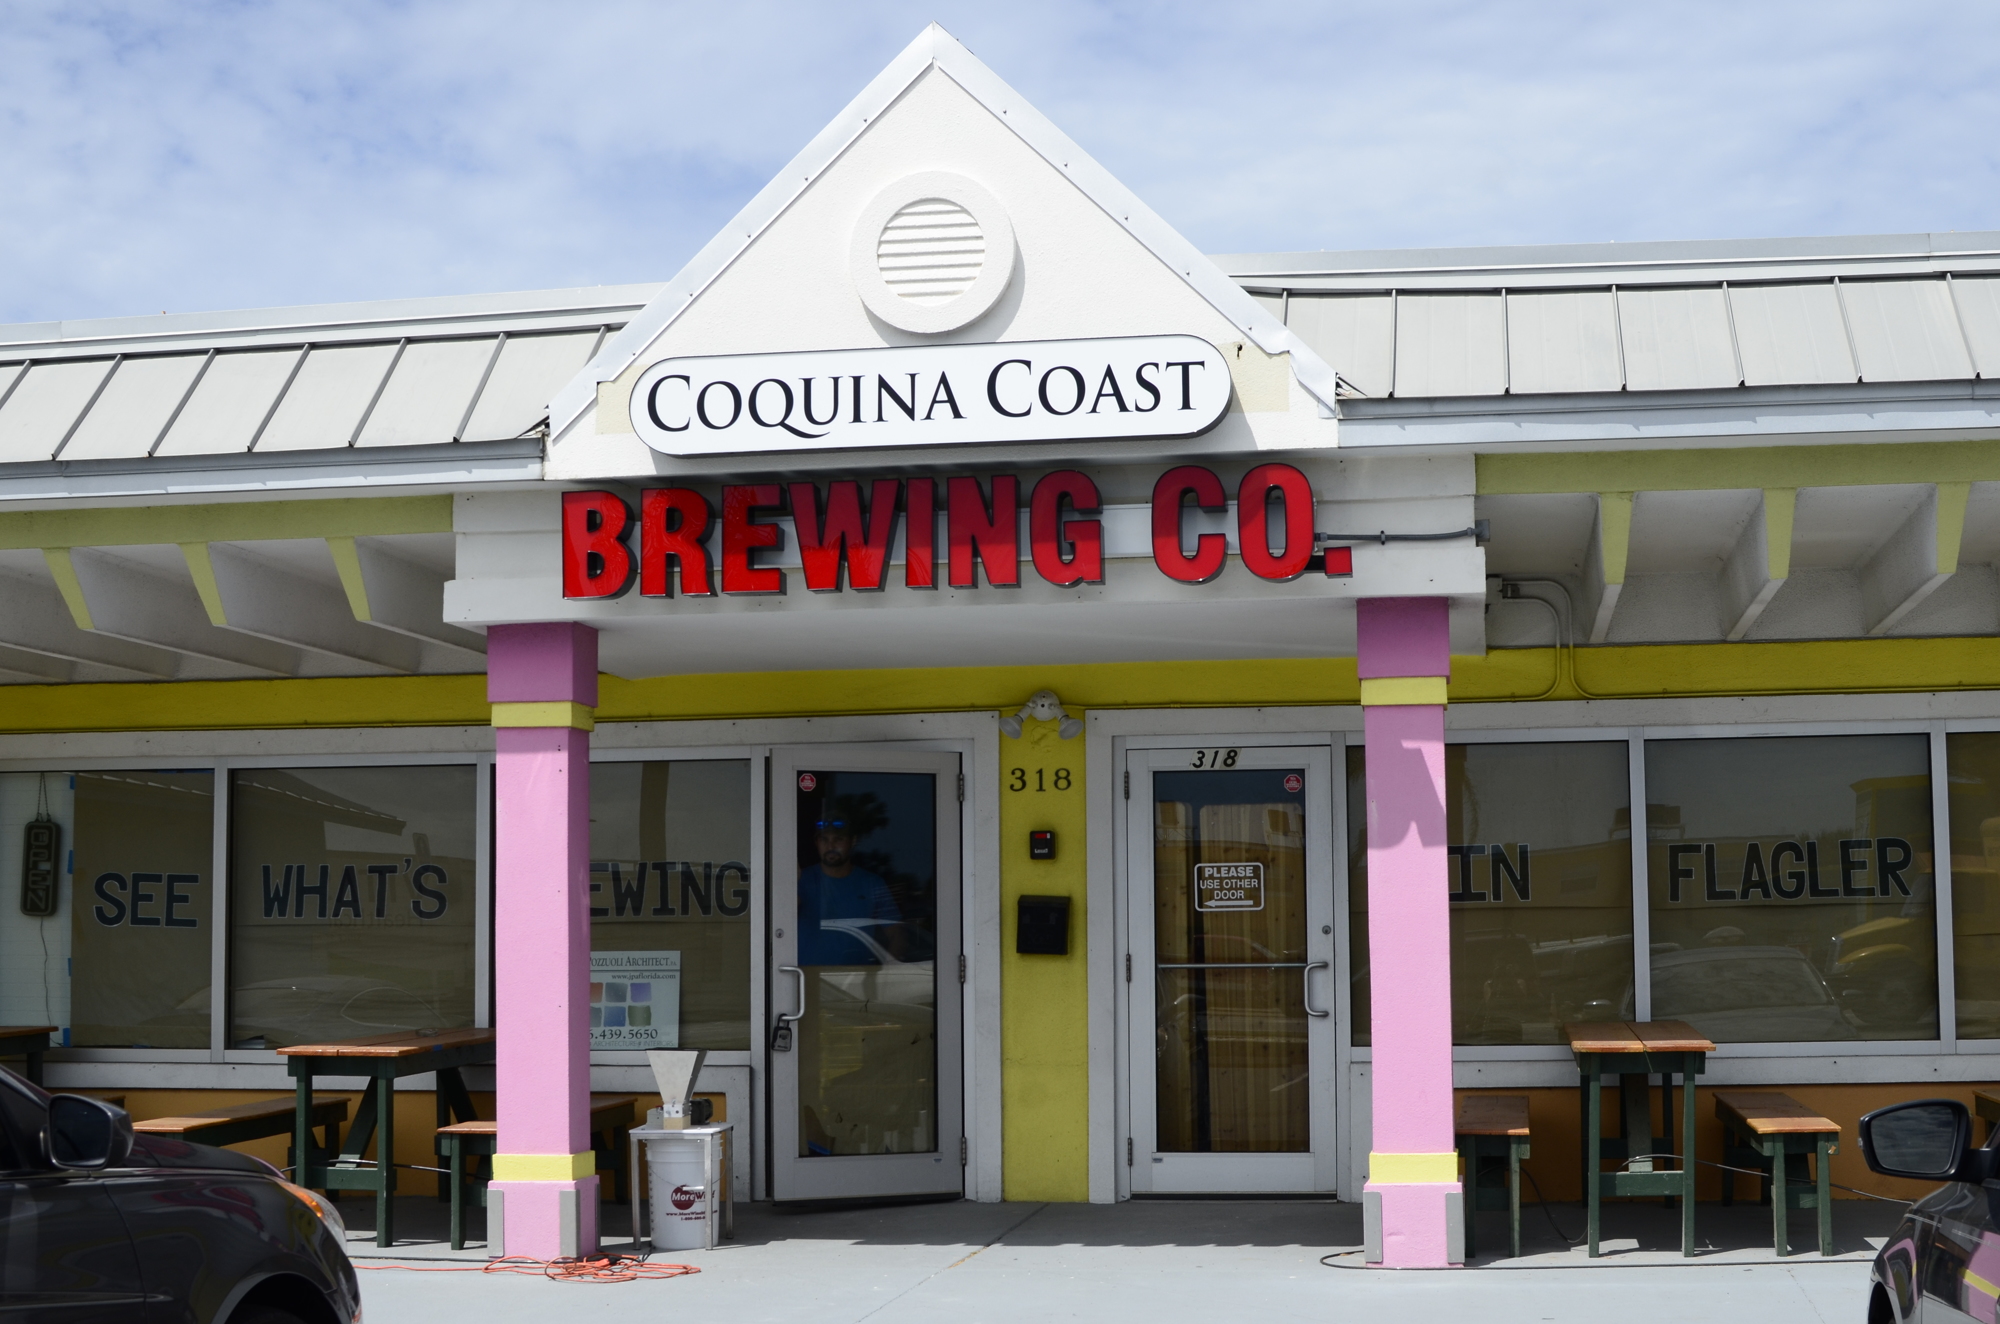 Coquina Coast Brewing Co. is located at 318 Moody Blvd., Flagler Beach.